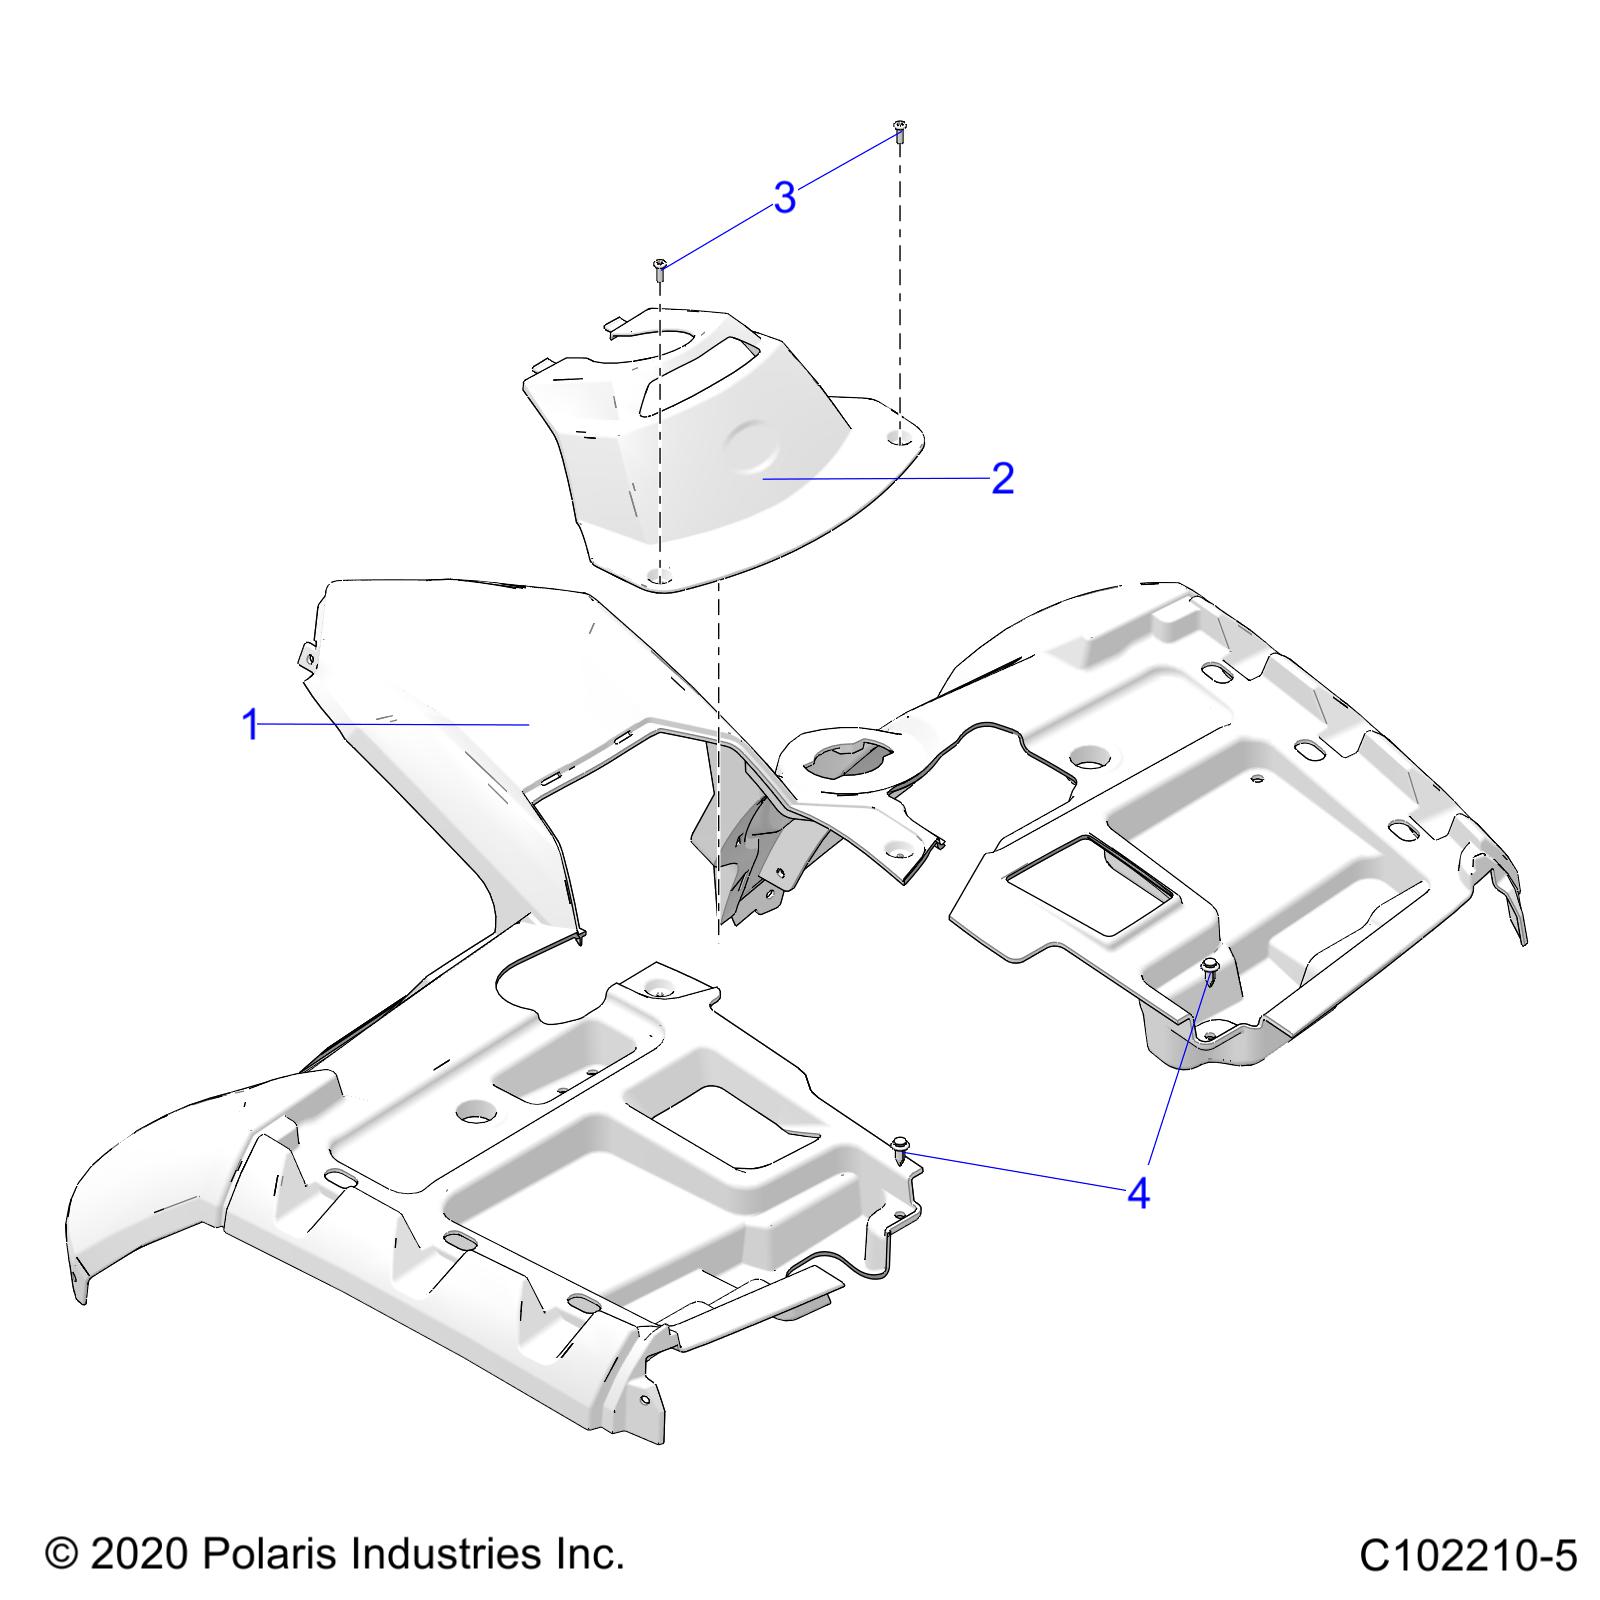 Part Number : 5437739-804 COVER-FR PNTD ST.GRAY